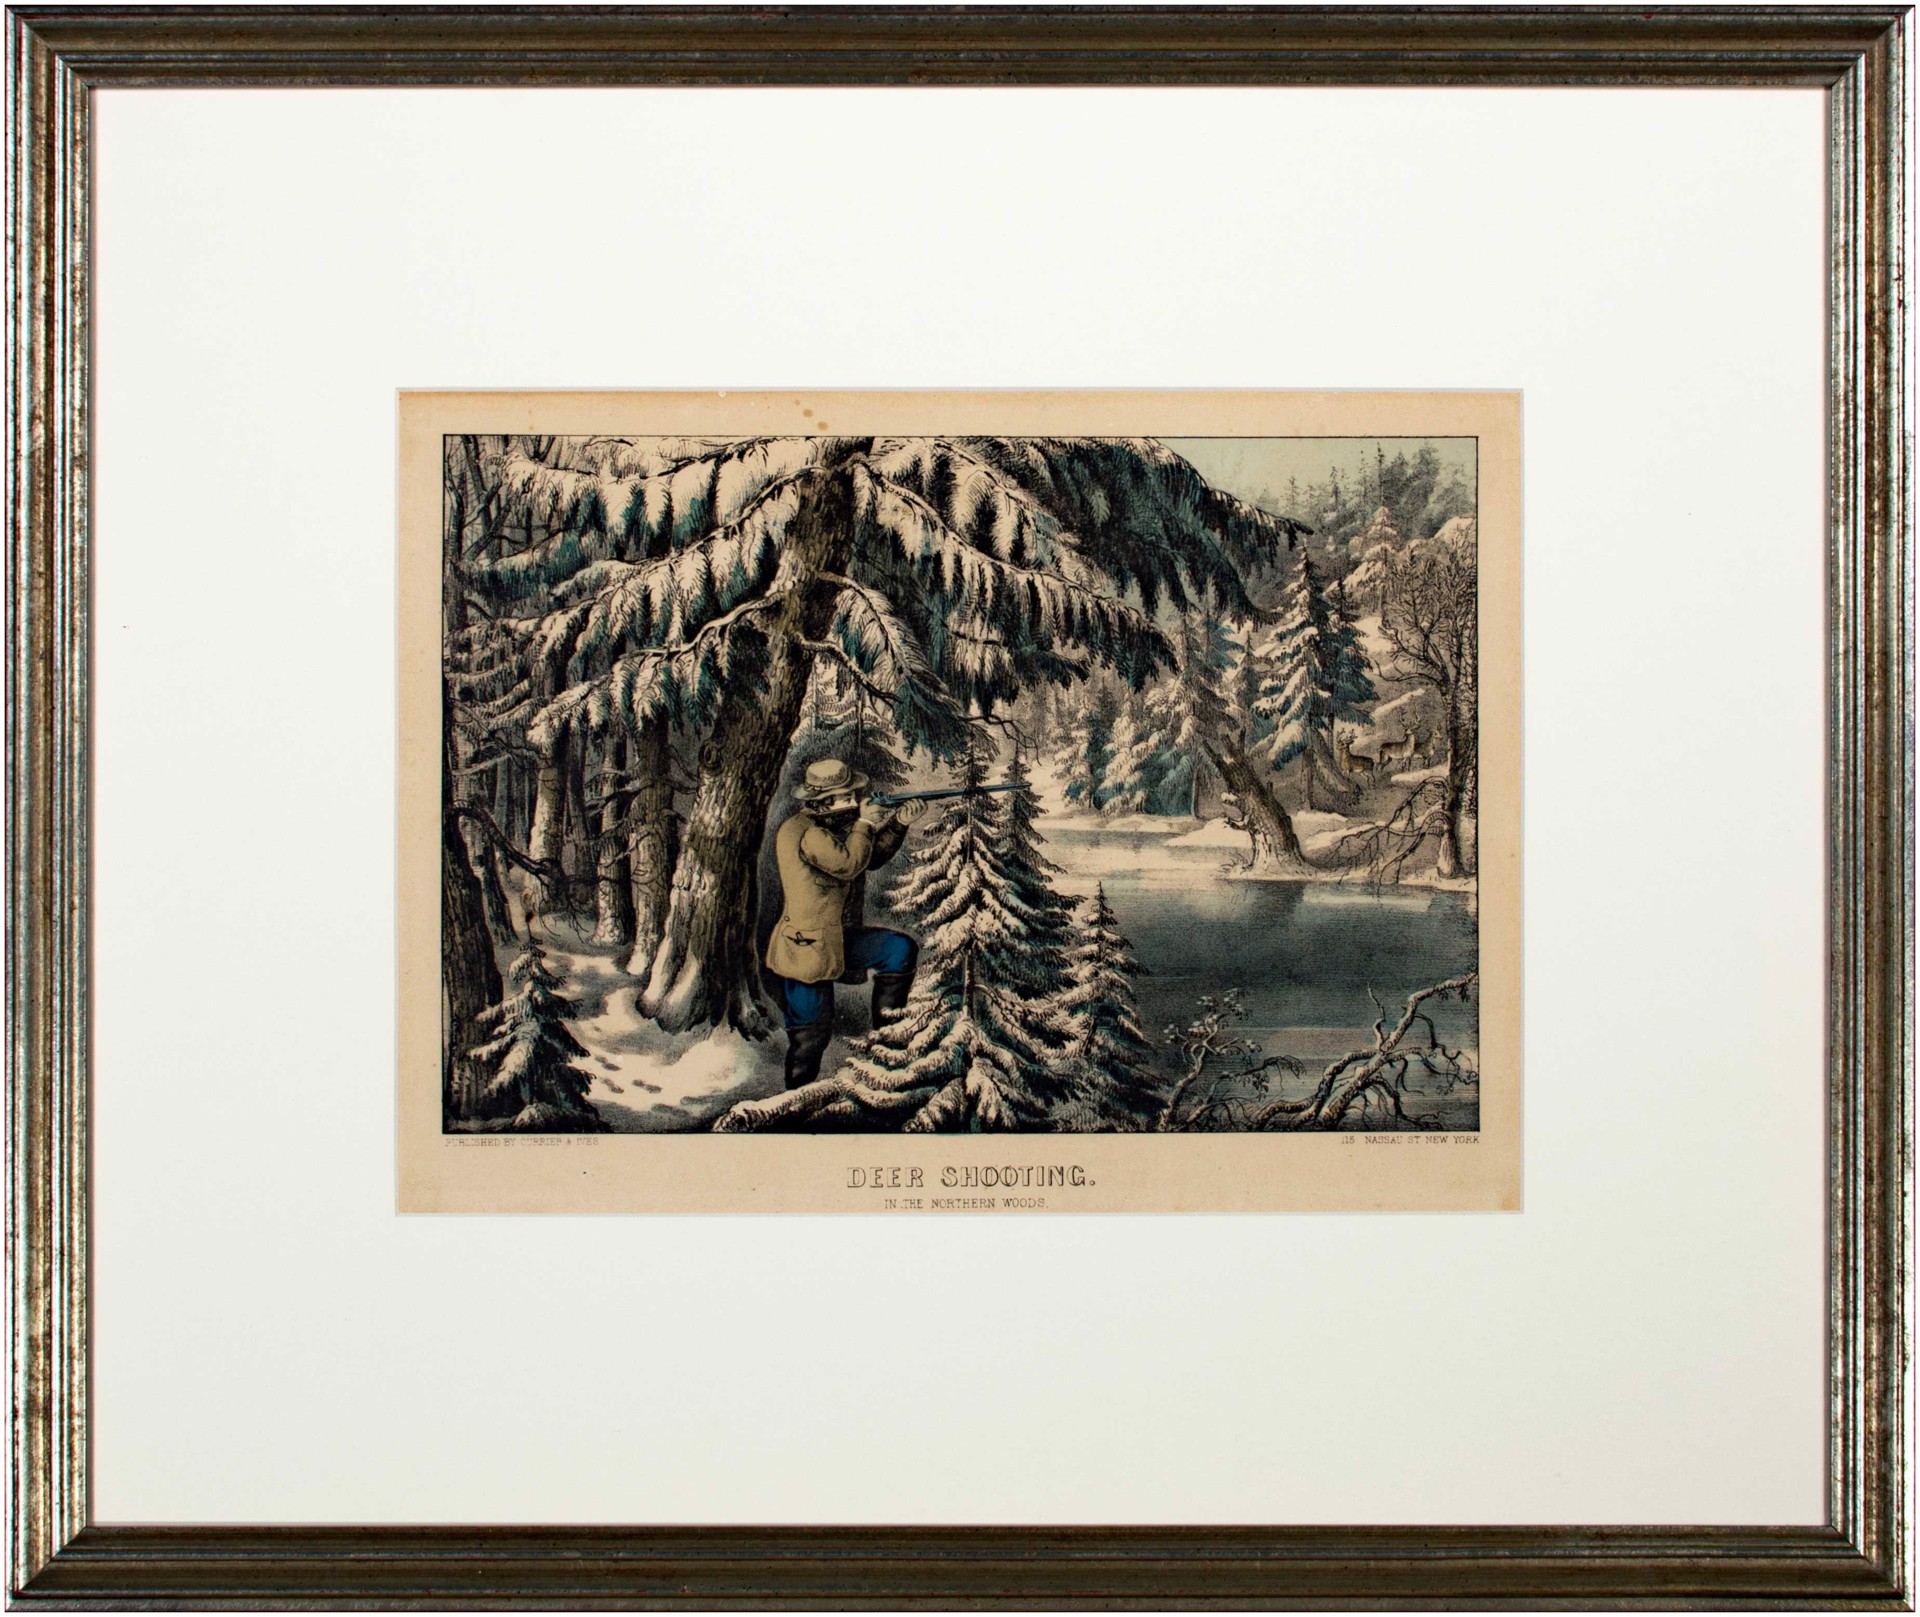 Deer Shooting In the Northern Woods by Currier & Ives